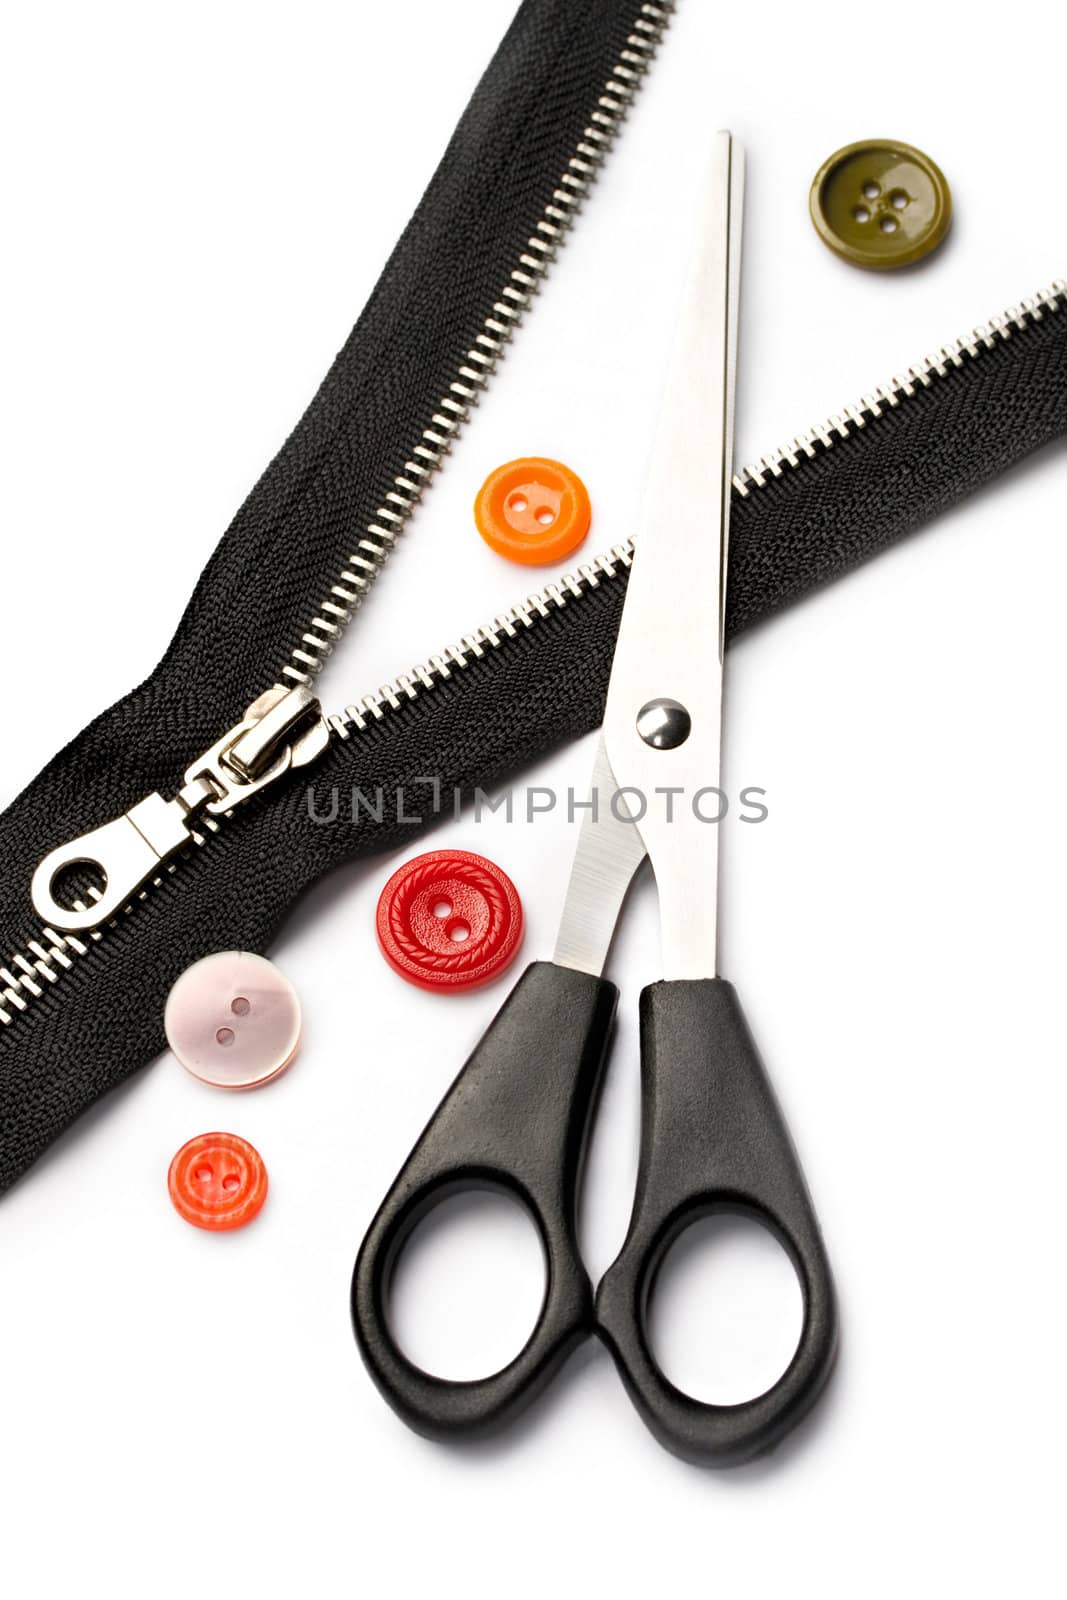 Scissors, zipper and button isolated on white by Garsya